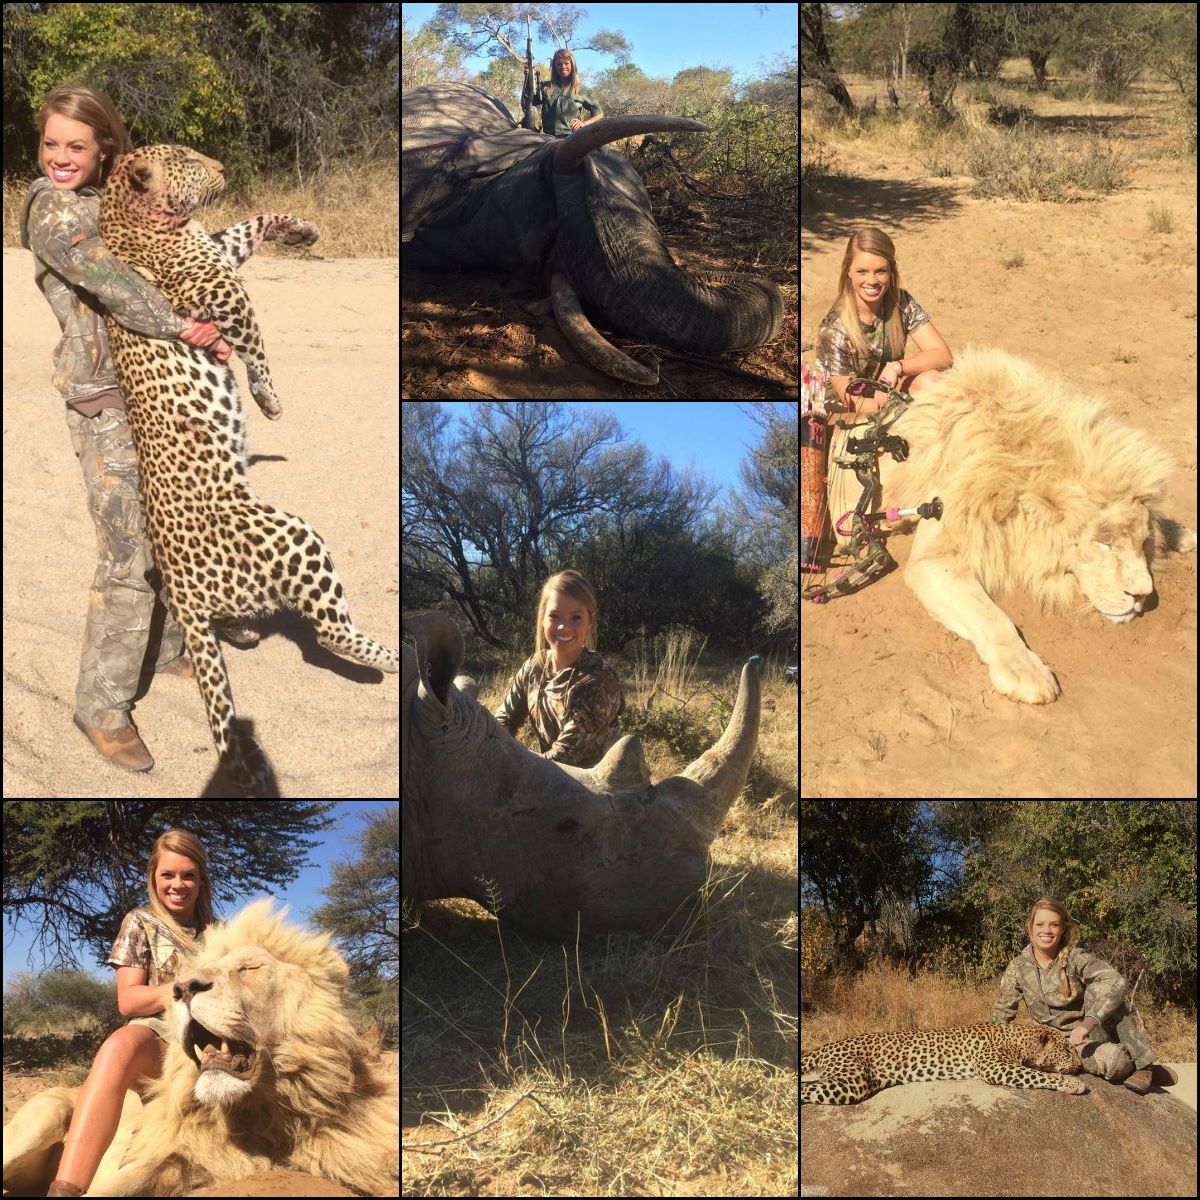 Texas cheerleader turned hunting enthusiast is taking heat for these photos put up on Facebook.